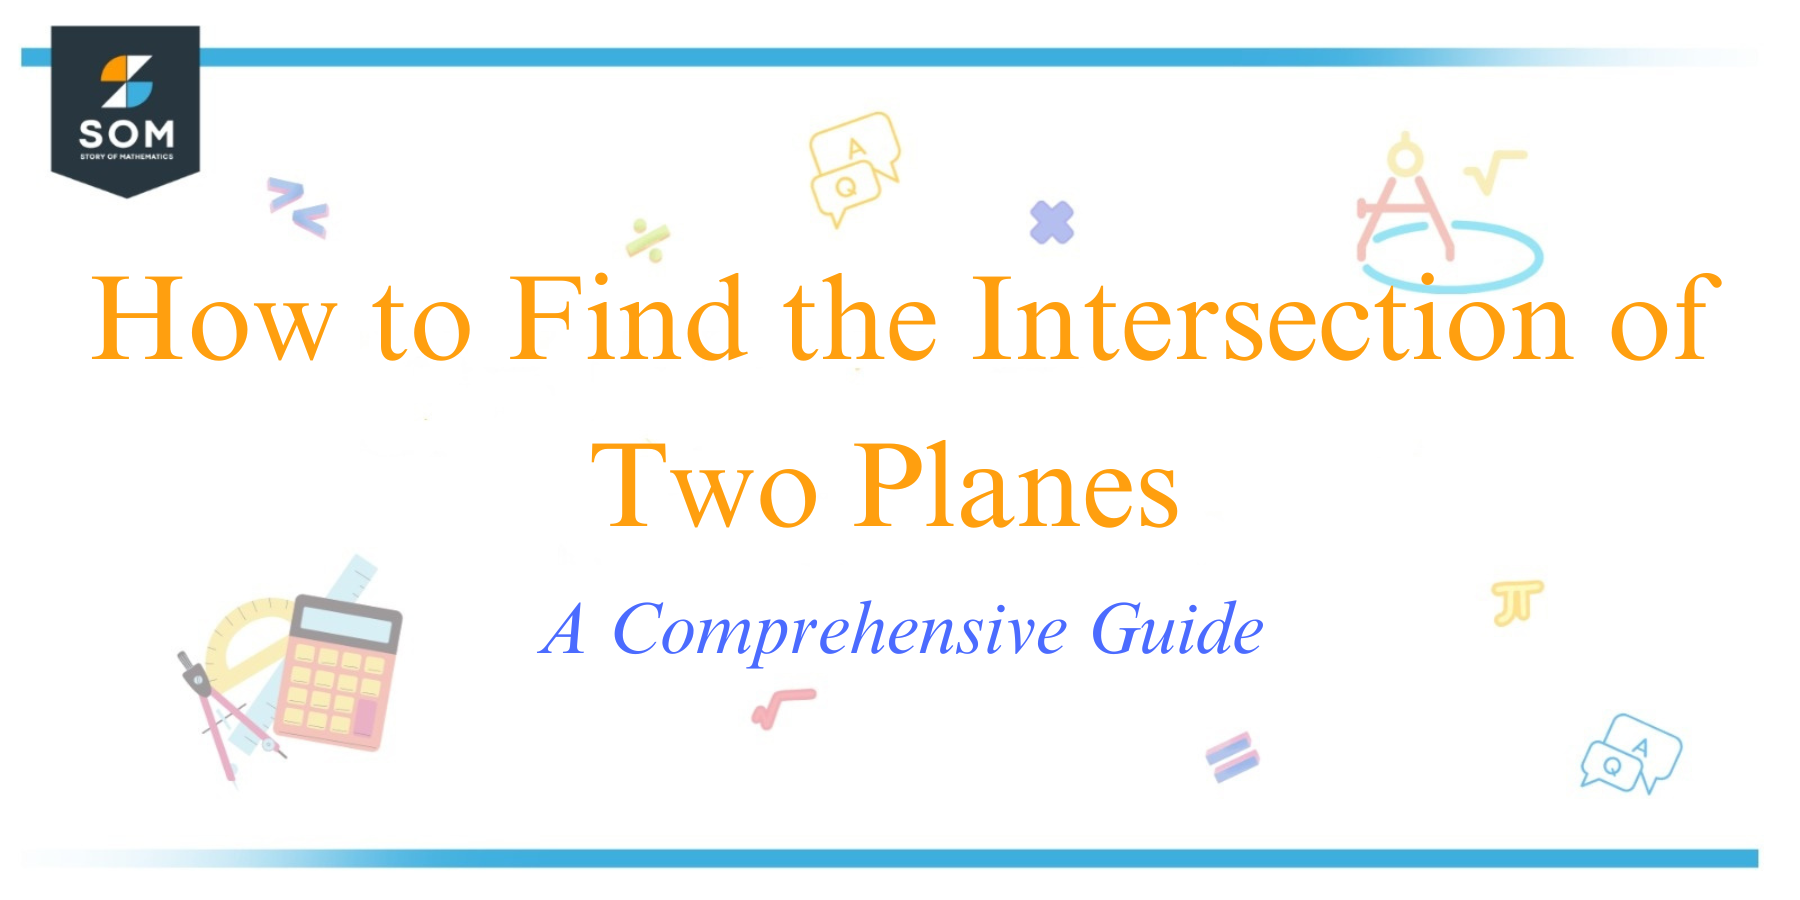 How to Find the Intersection of Two Planes A Comprehensive Guide